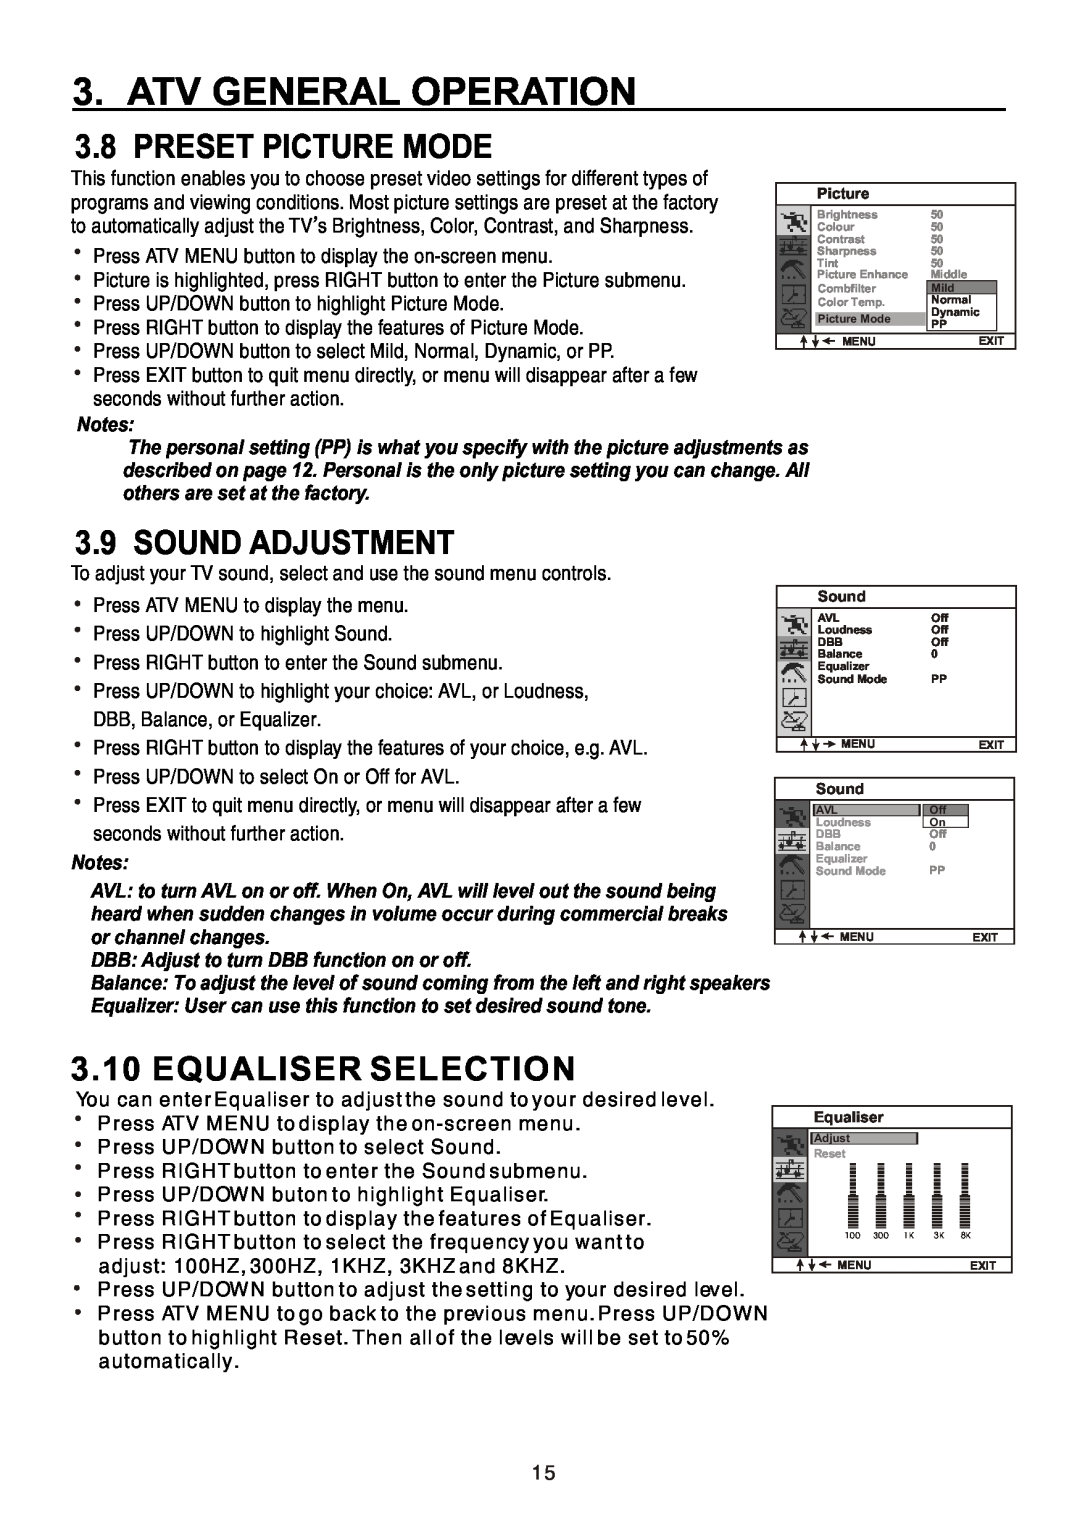 Teac CT-W32ID owner manual Preset Picture Mode, Sound Adjustment, Equaliser Selection, Atv General Operation 